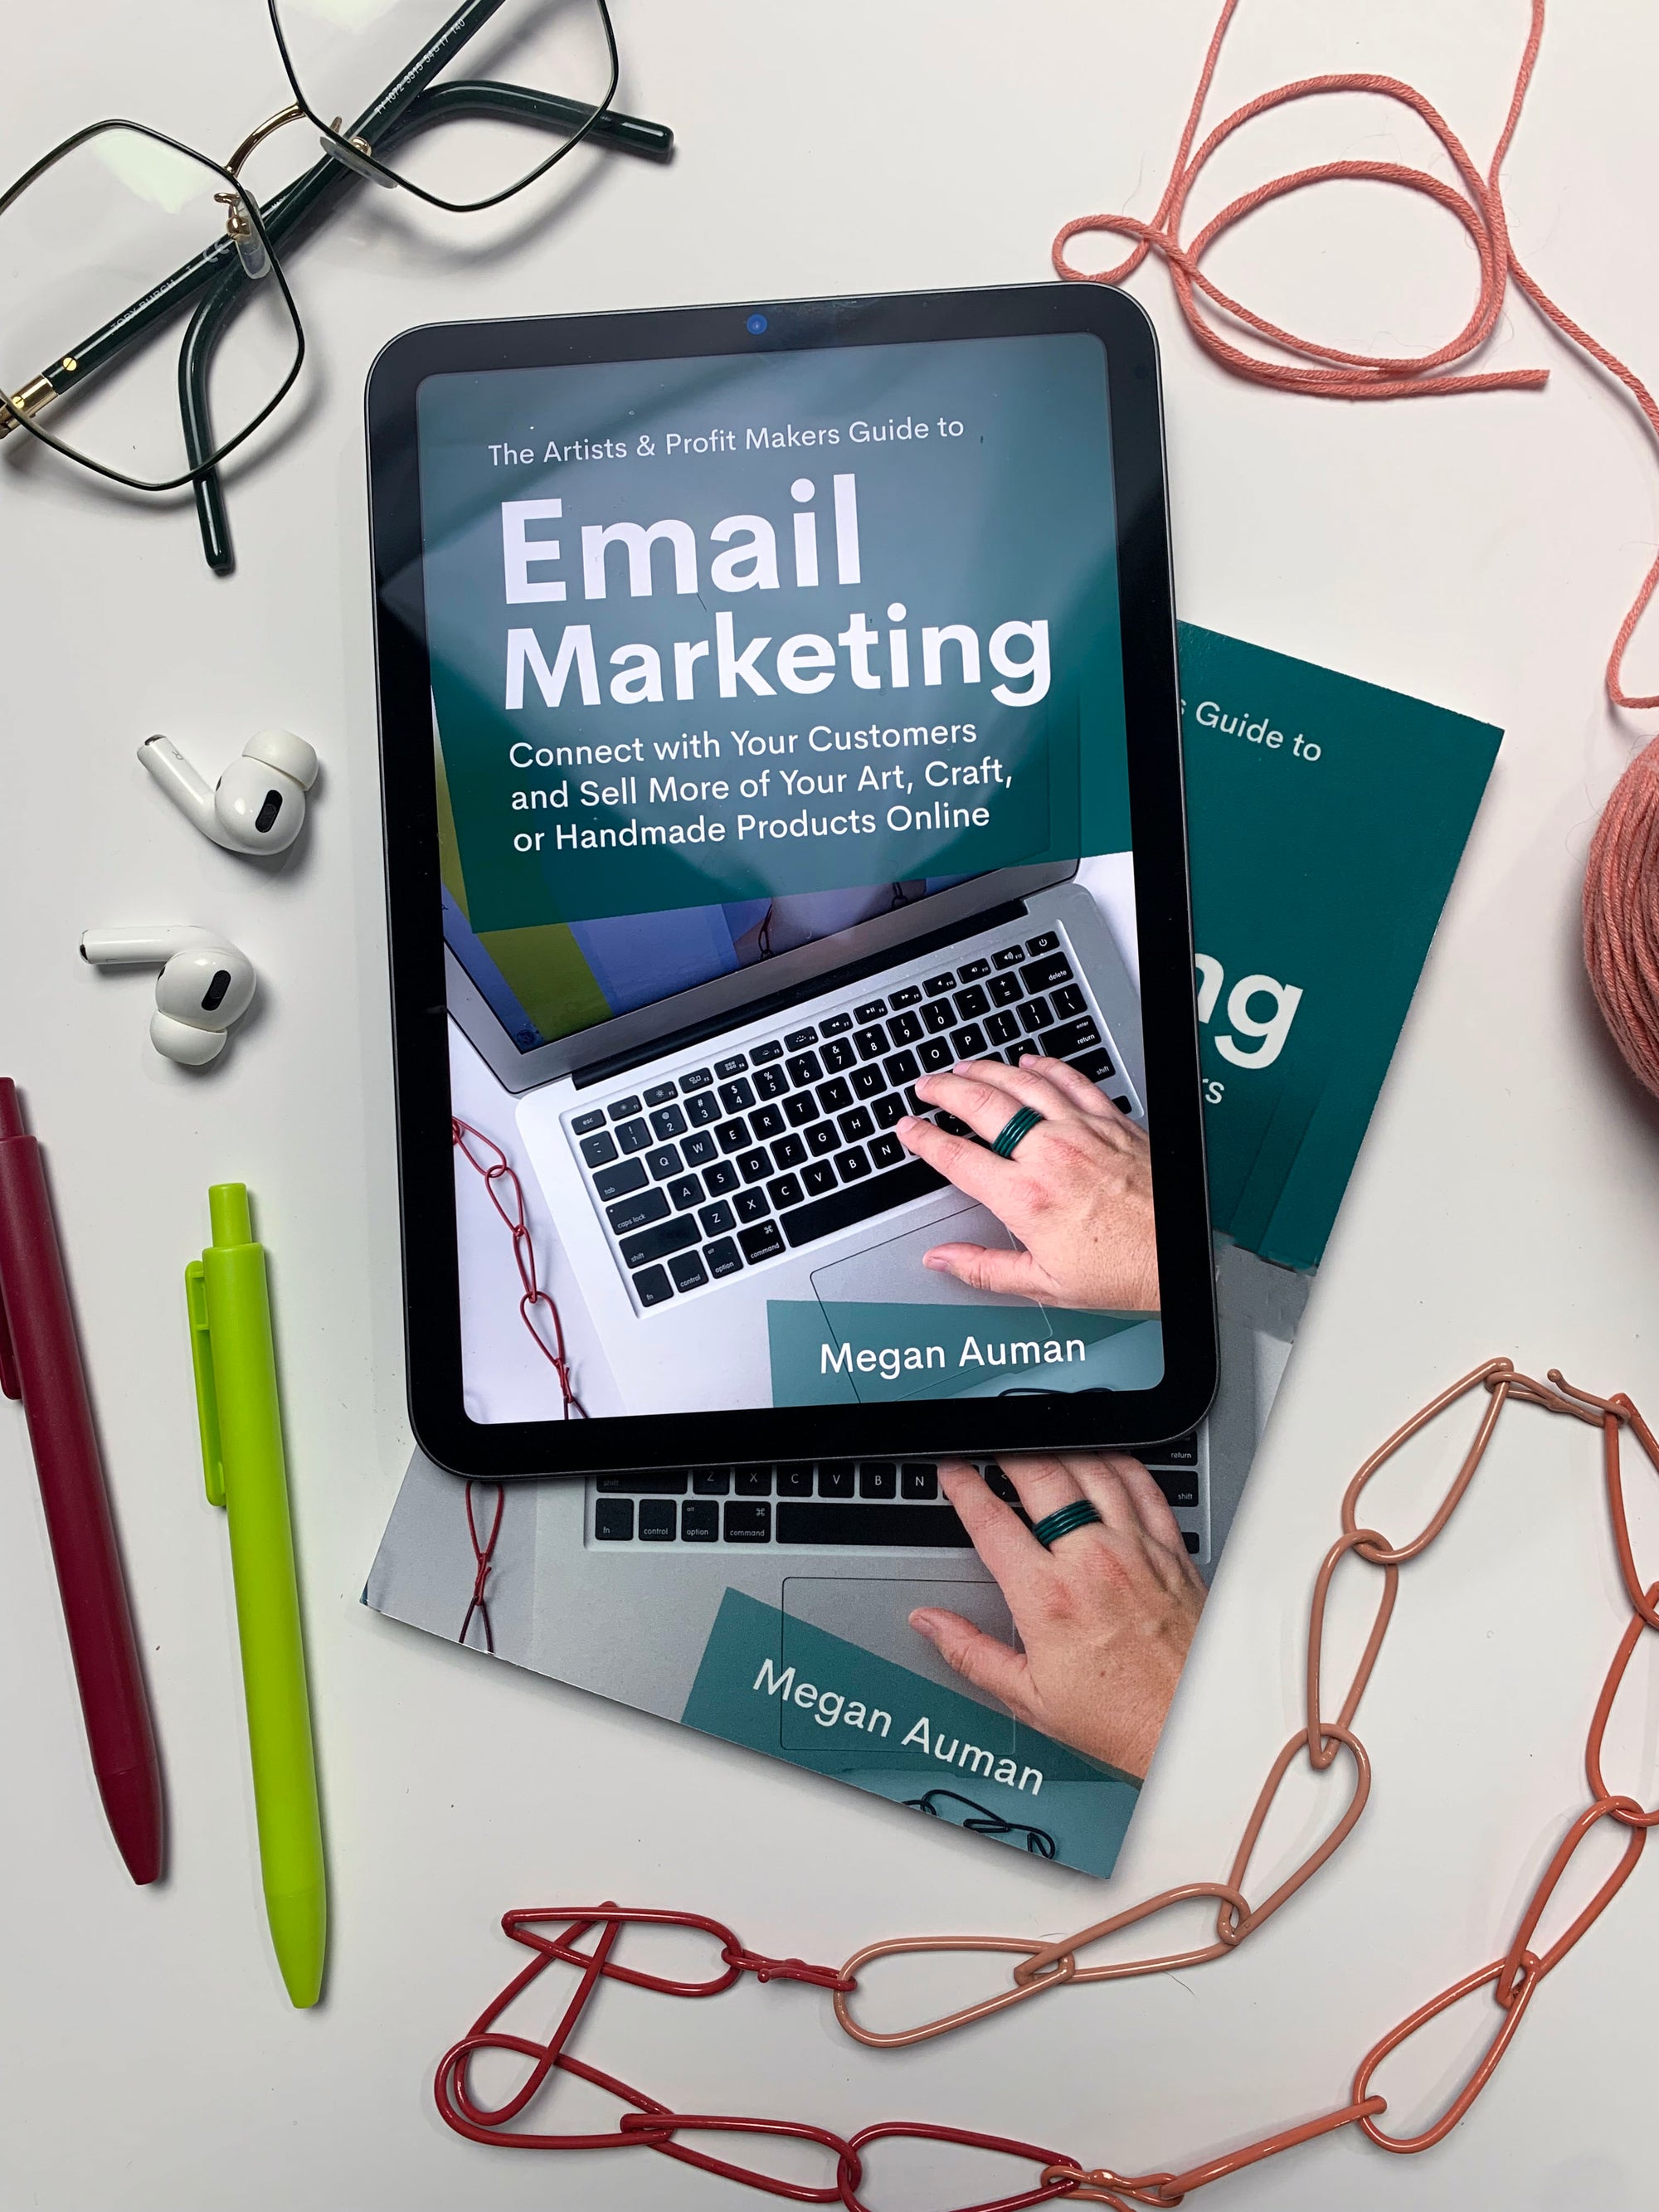 The Artists & Profit Makers Guide to Email Marketing Ultimate Bundle: Signed Copy + Digital + Audiobook Editions